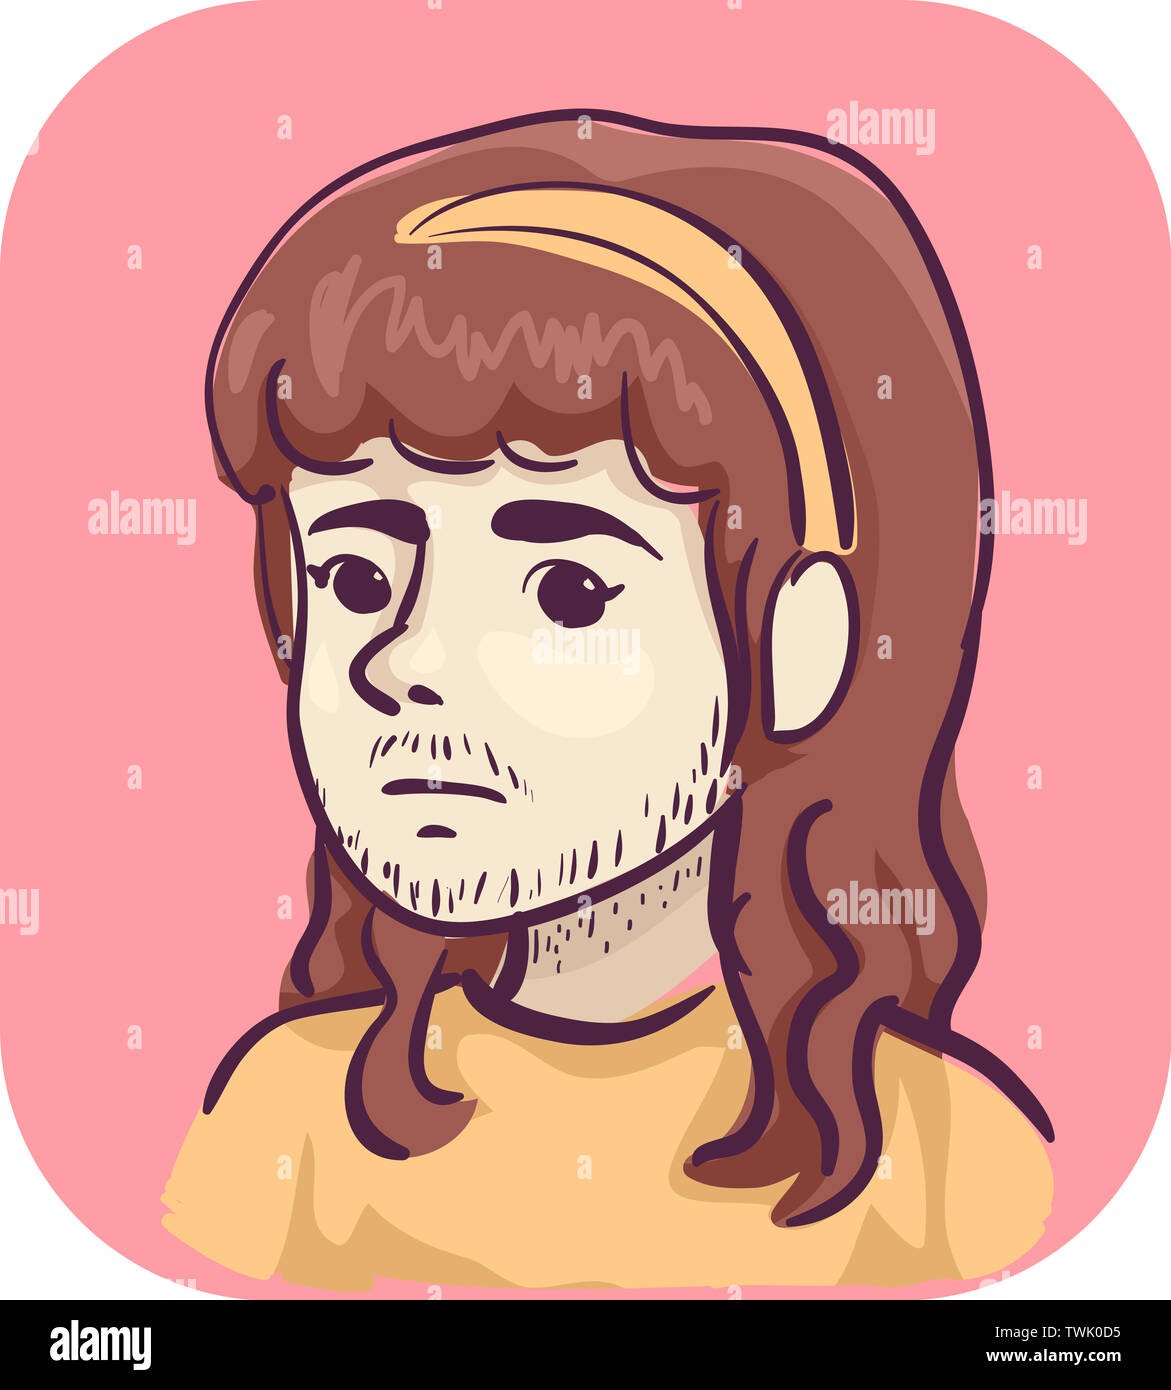 Illustration of a Girl with Excessive Facial Hair Stock Photo